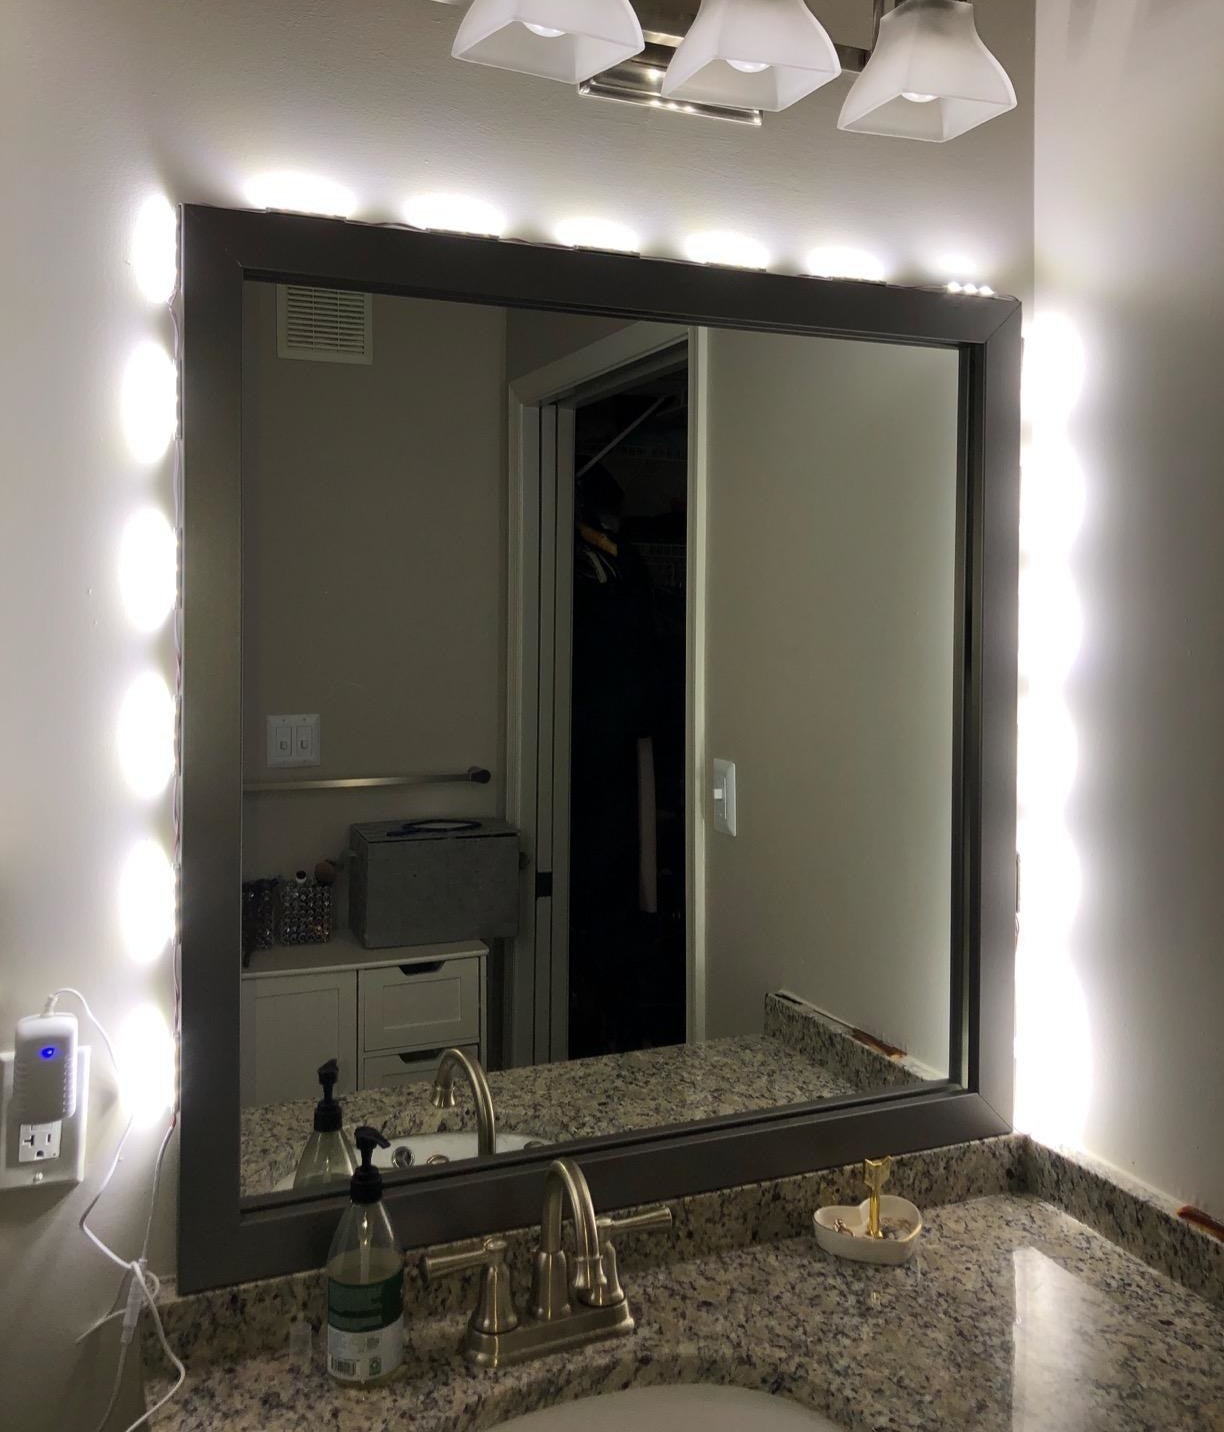 Reviewer photo of the vanity lights lit up around a bathroom mirror